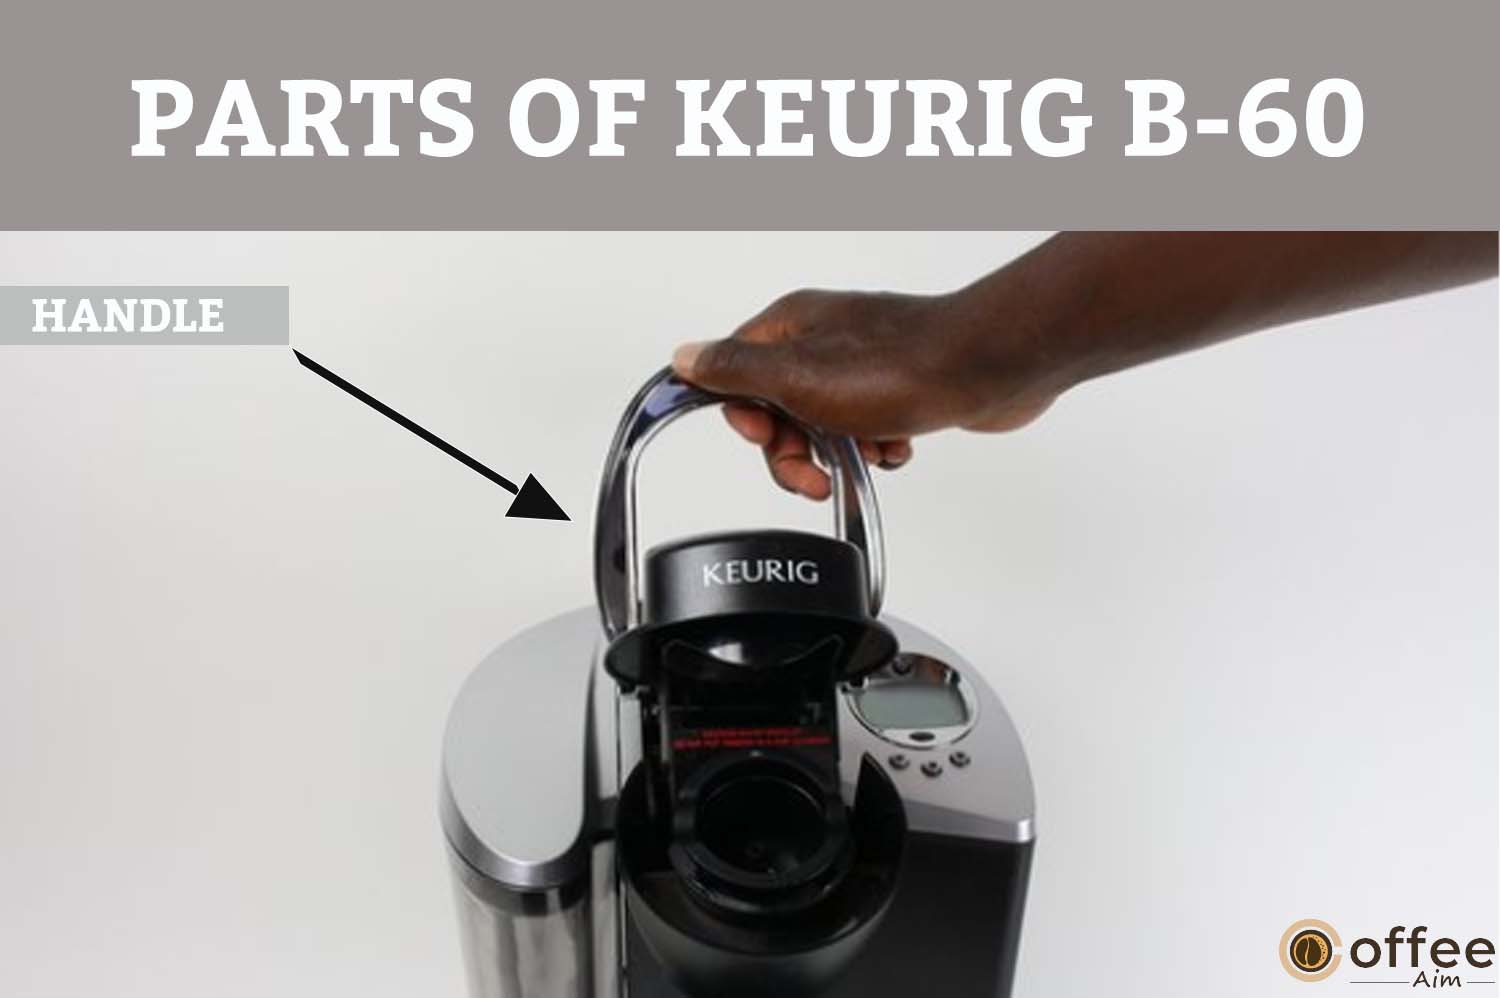 The handle on the upper front of your coffee maker allows you to open the K-Cup holder. Insert your K-Cup pod for brewing flavorful coffee by lifting the handle.